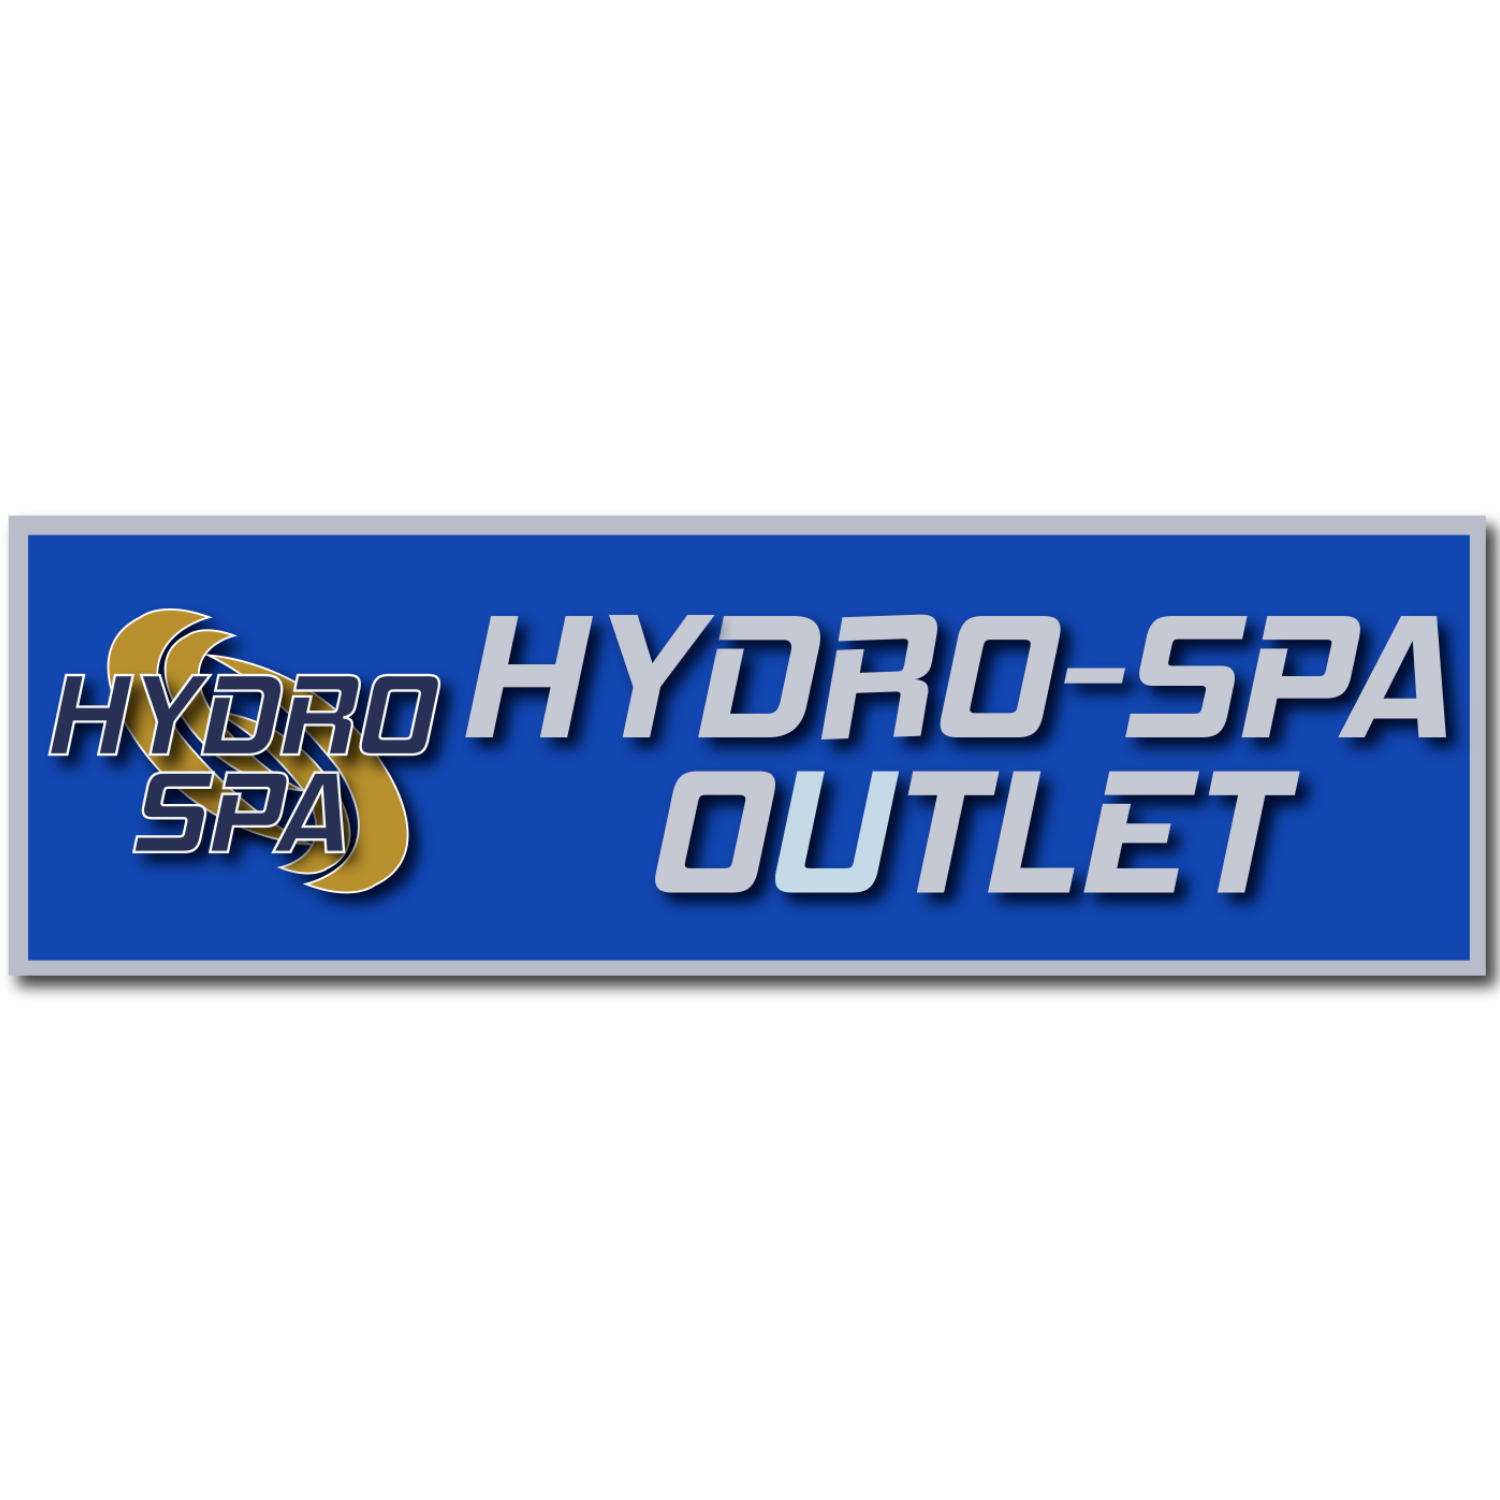 Hydro-Spa Outlet